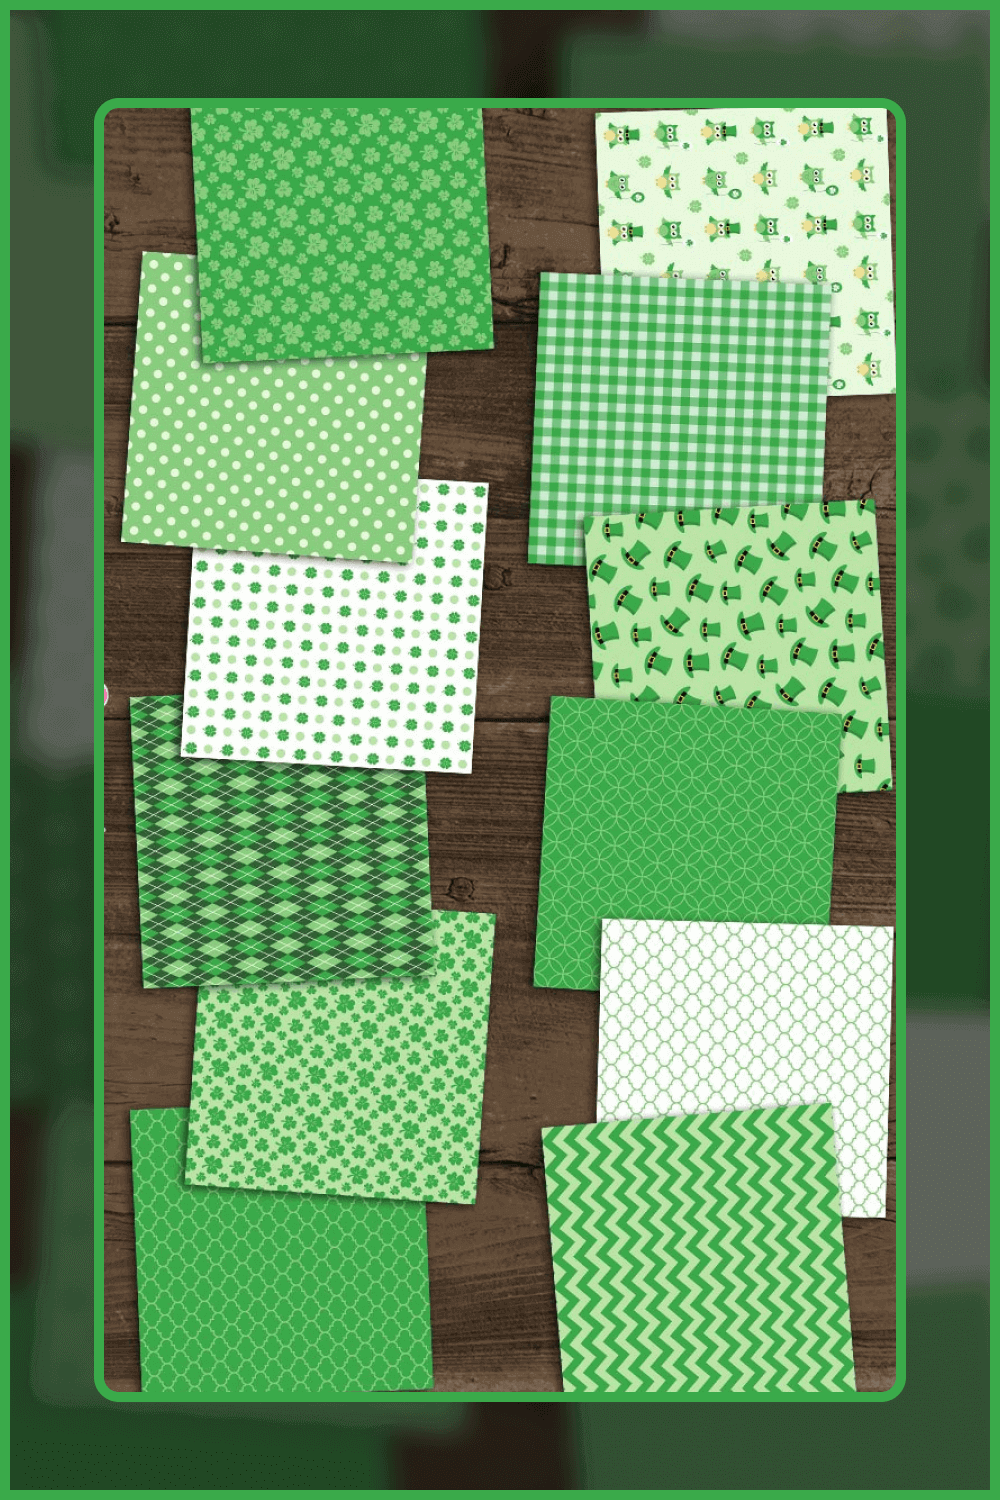 Various Types of Digital Paper for St. Patrick's Day.